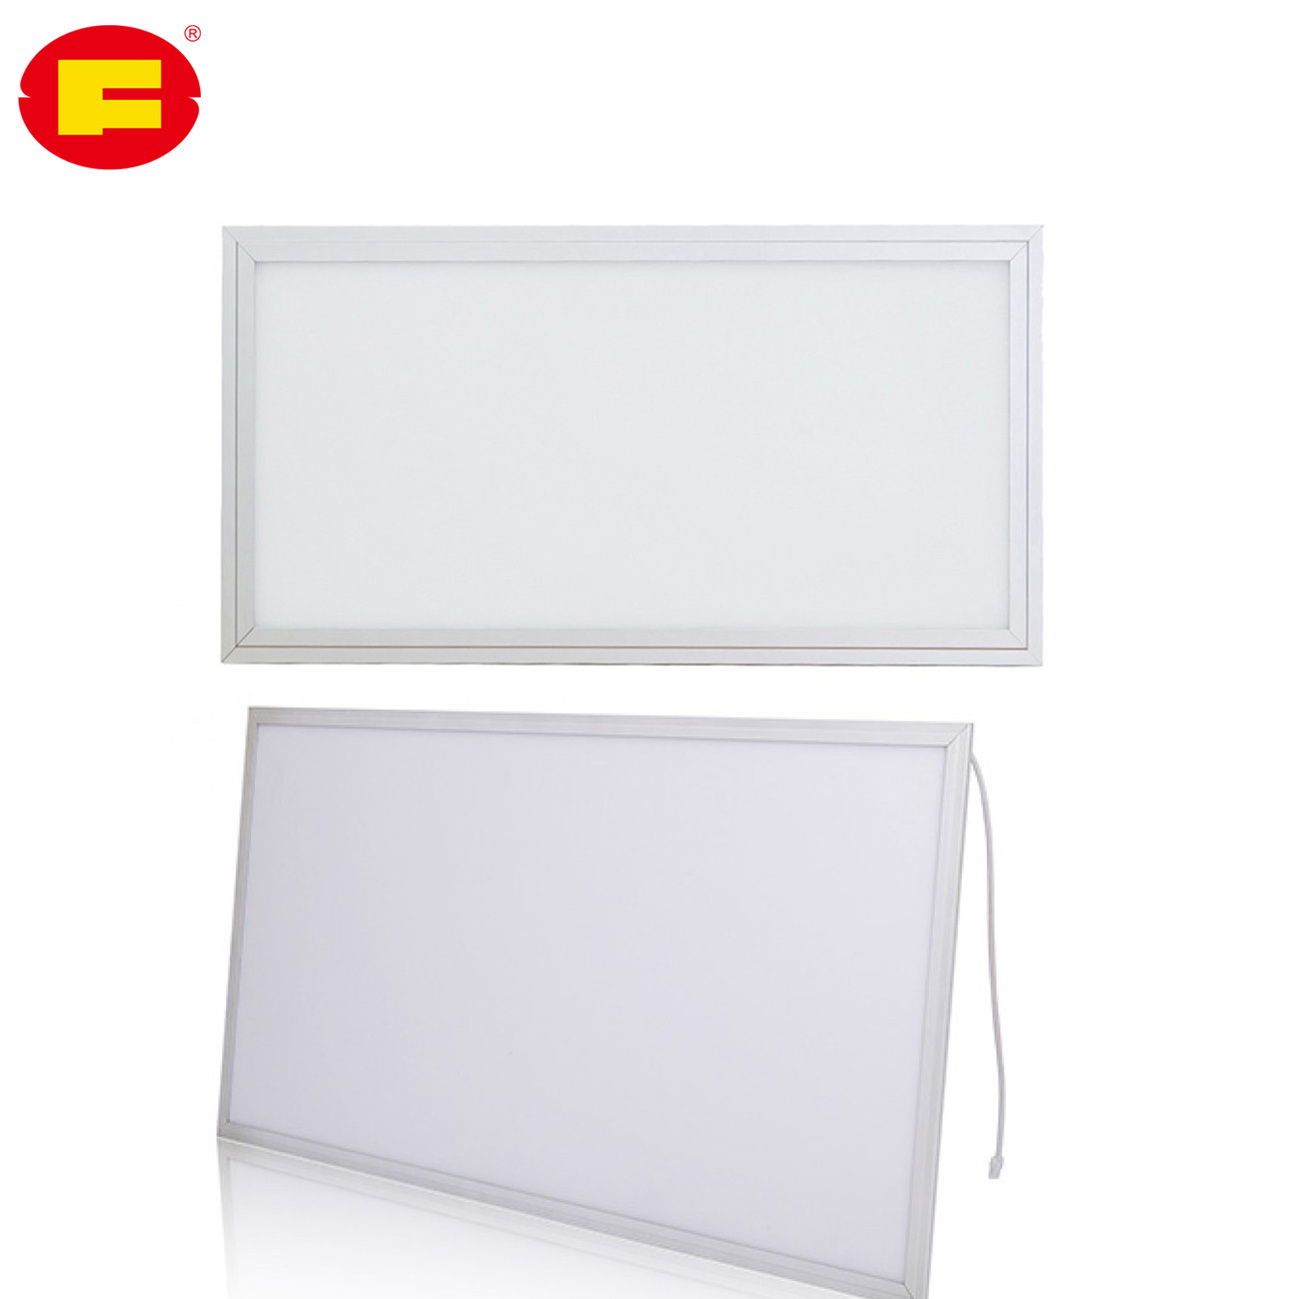 Embedded/Hanging Dimmable LED Panel Light for Exhibition Hall